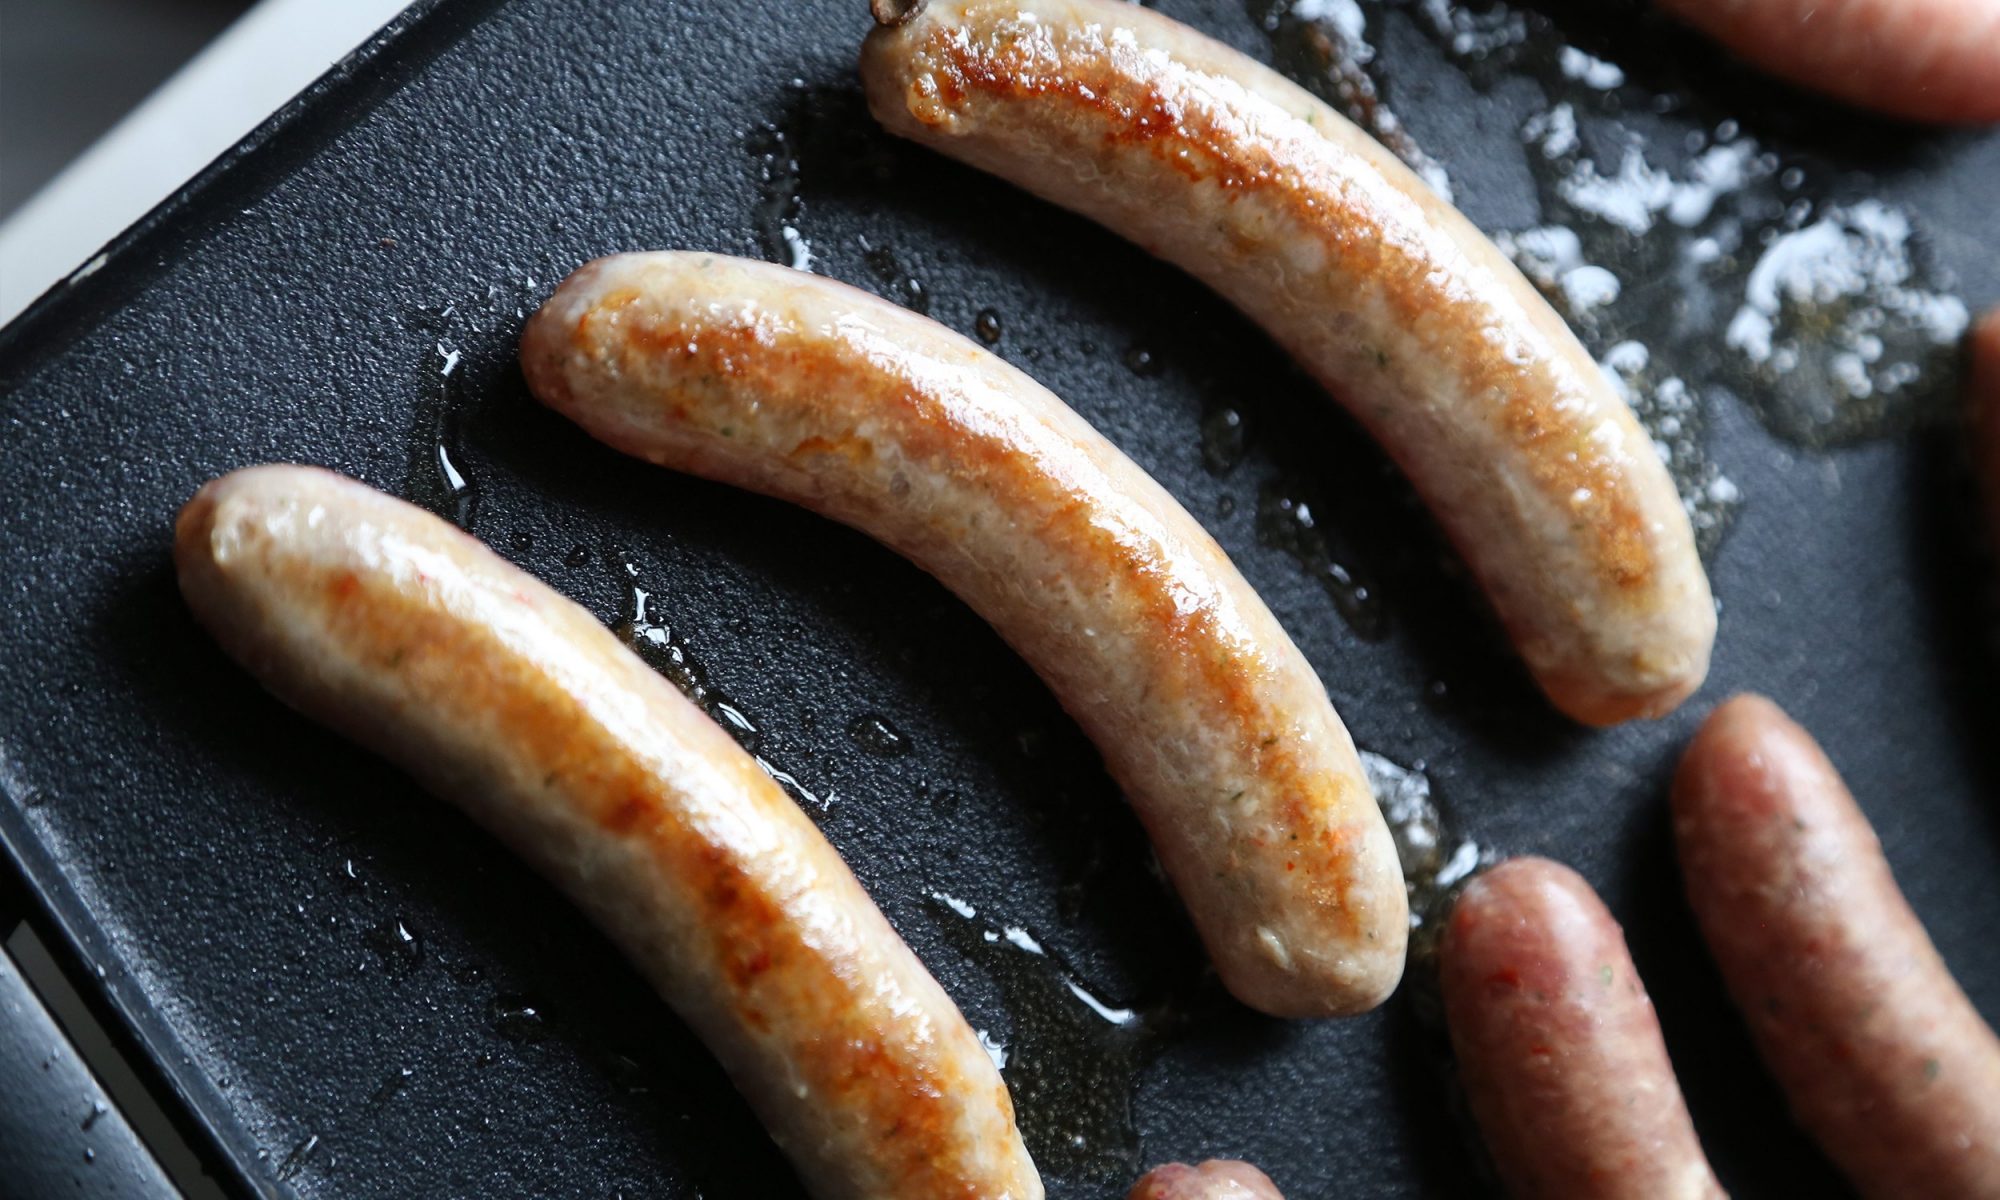 EC: Vegetarian Sausages Can Have Just as Much Unhealthy Salt as Meat Sausages